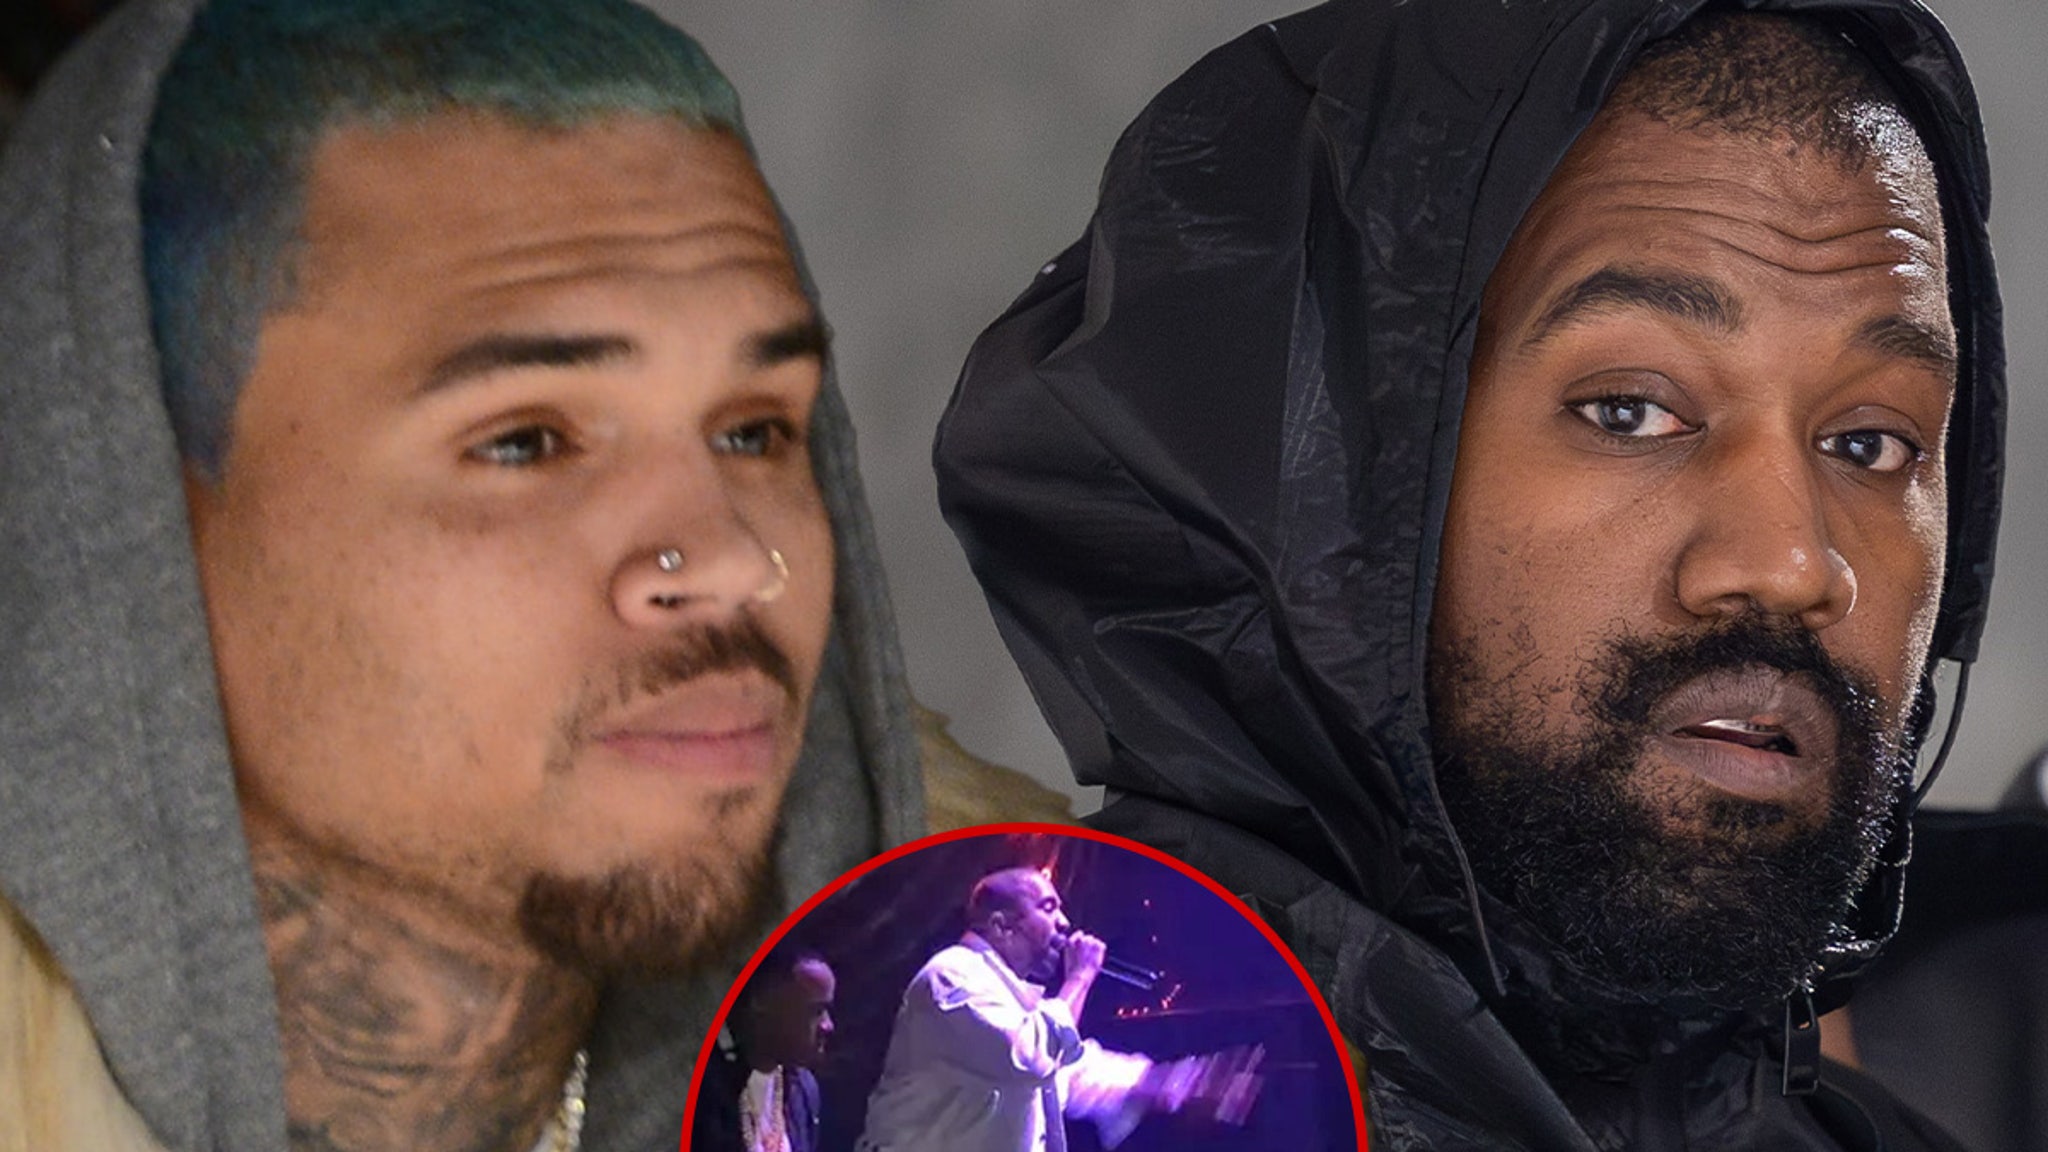 Chris Brown Rips Unnamed Rapper For Club Rant, Fans Think it’s Kanye West